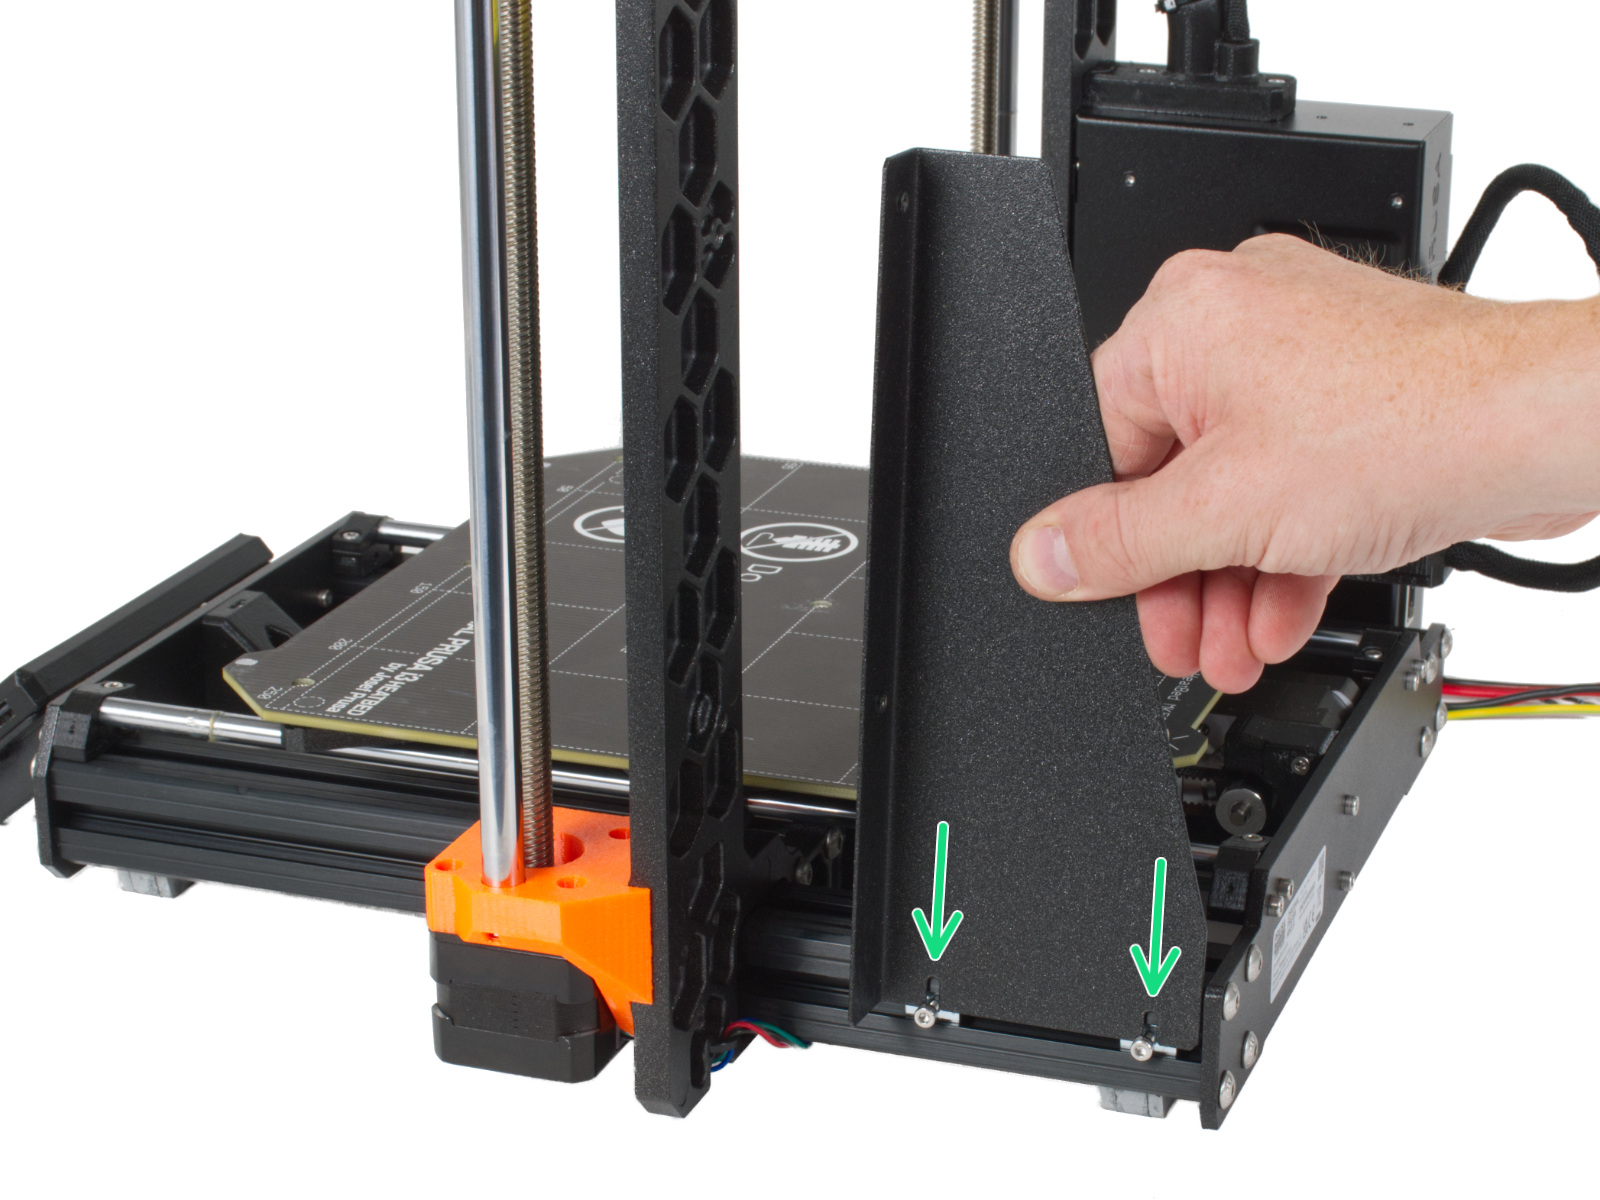 Mounting the printer frame support